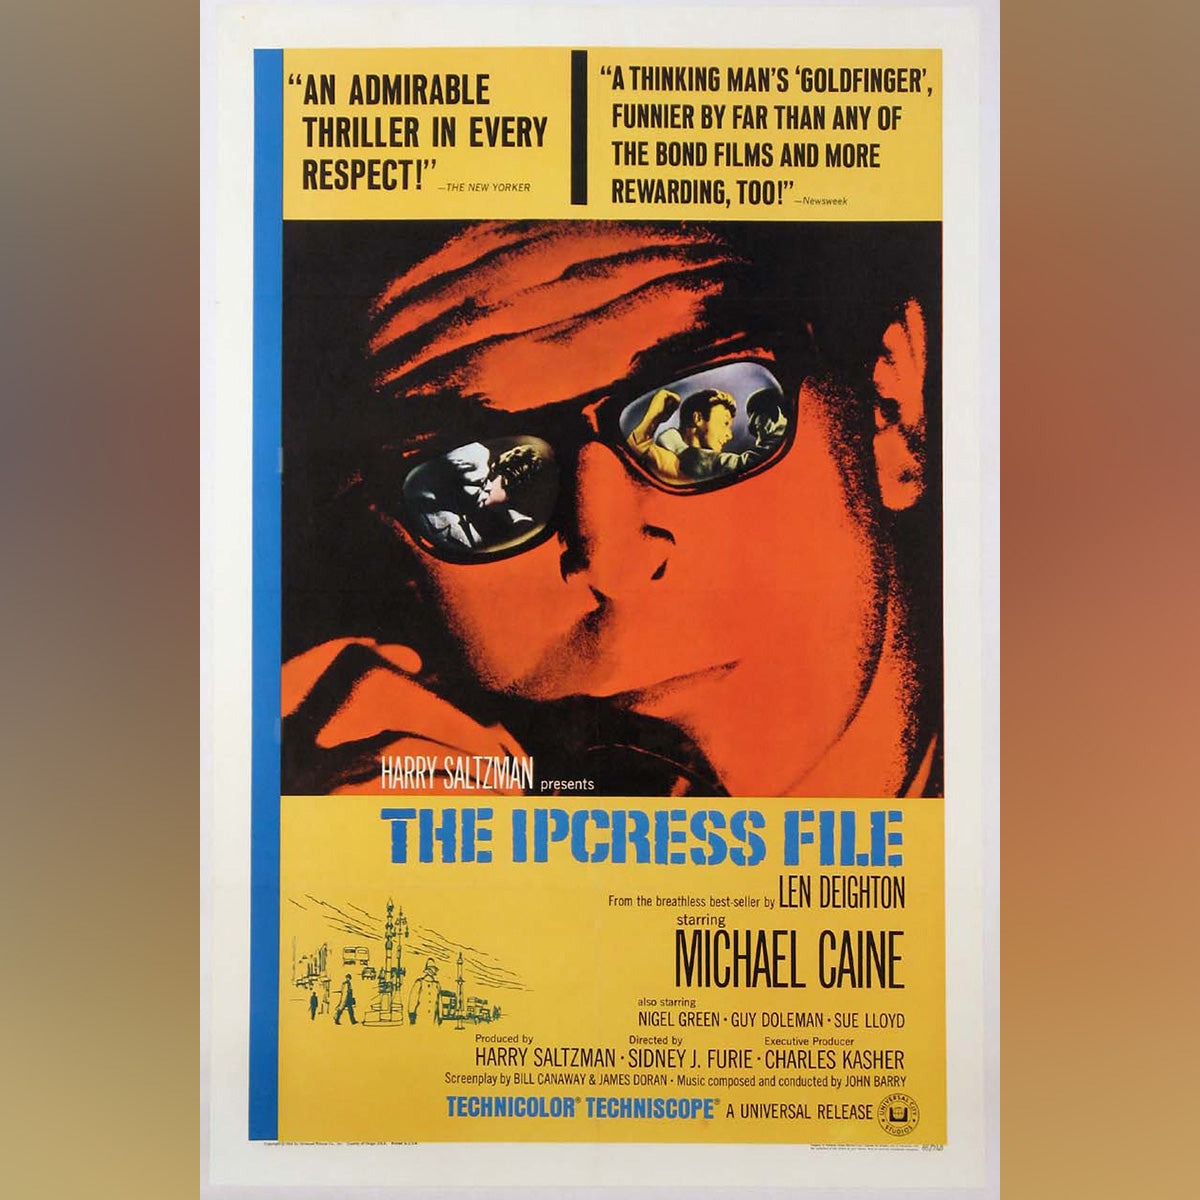 Original Movie Poster of Ipcress File, The (1965)